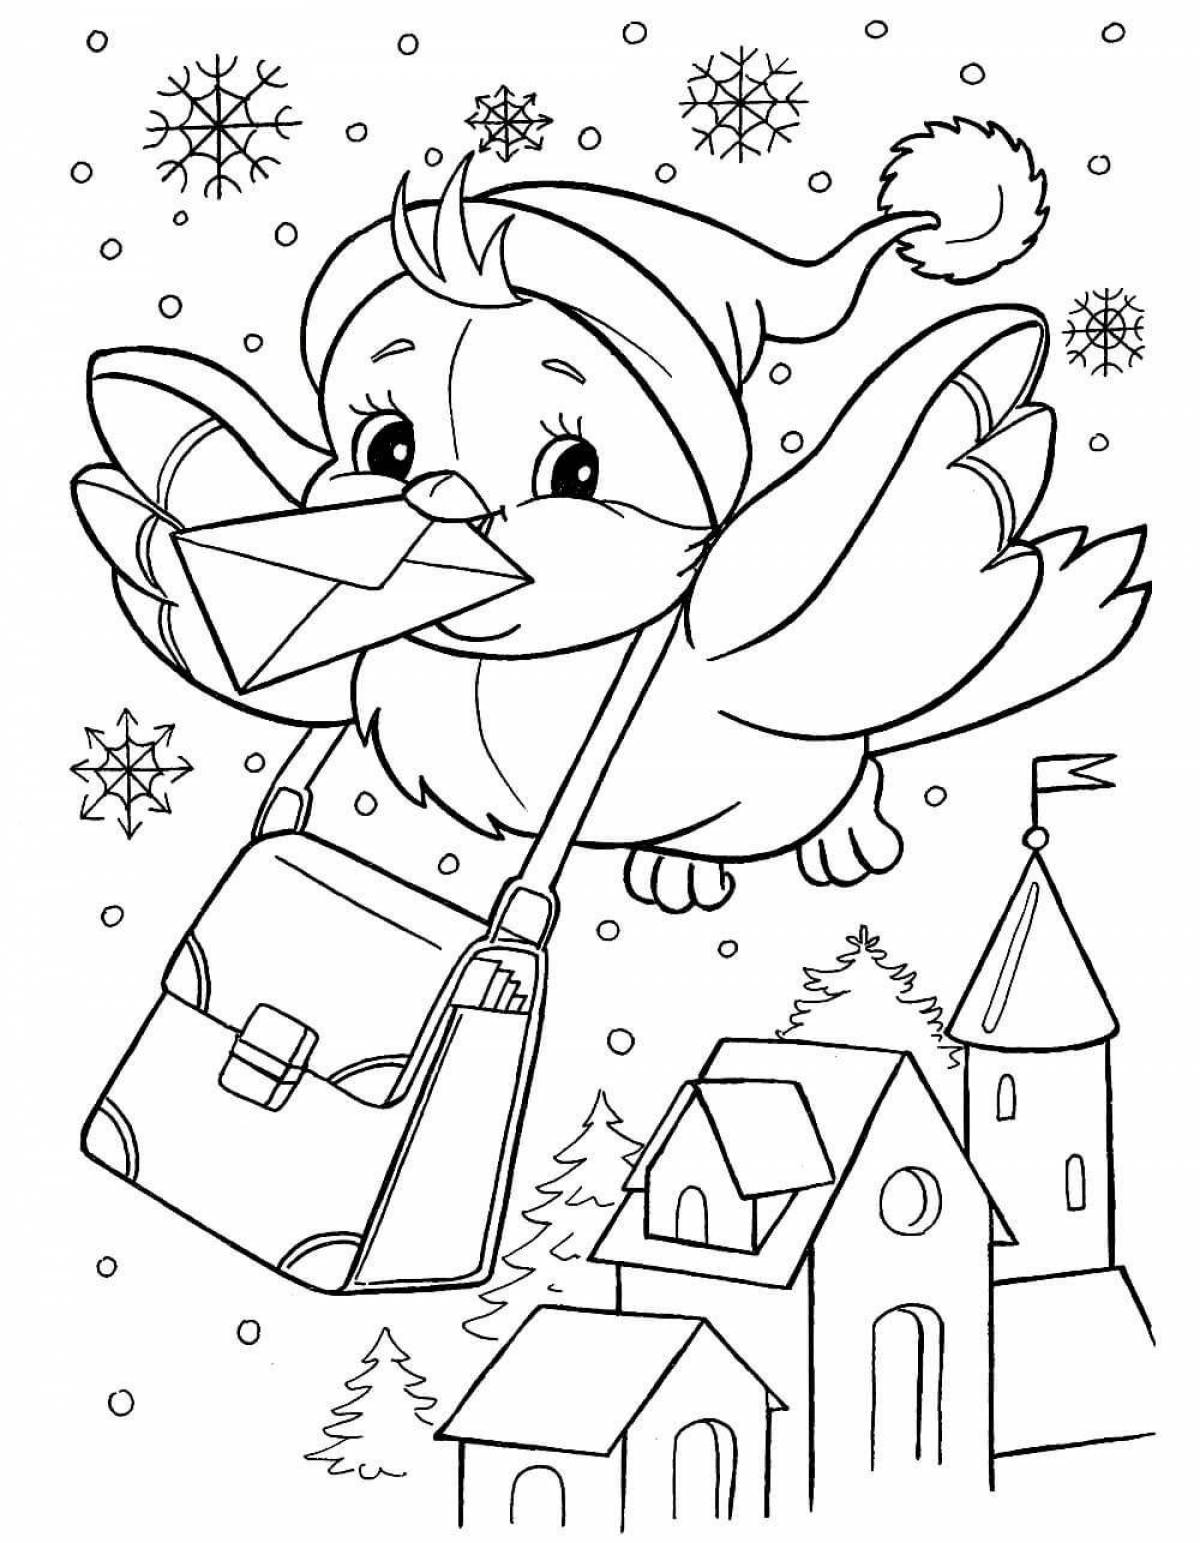 Inspirational winter coloring book for 4-5 year olds